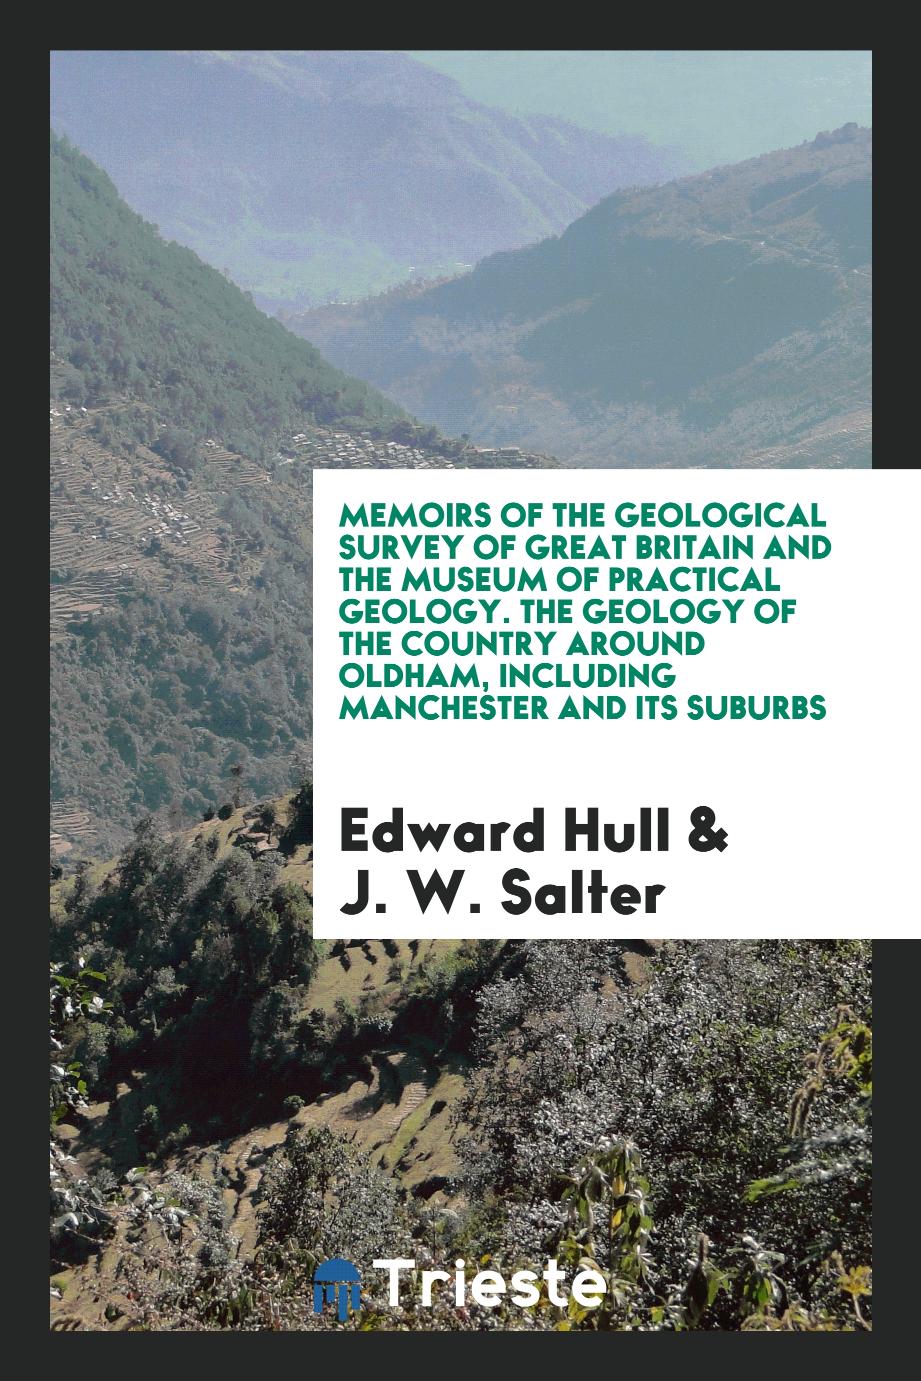 Memoirs of the Geological Survey of Great Britain and the Museum of Practical Geology. The Geology of the Country around Oldham, Including Manchester and its Suburbs